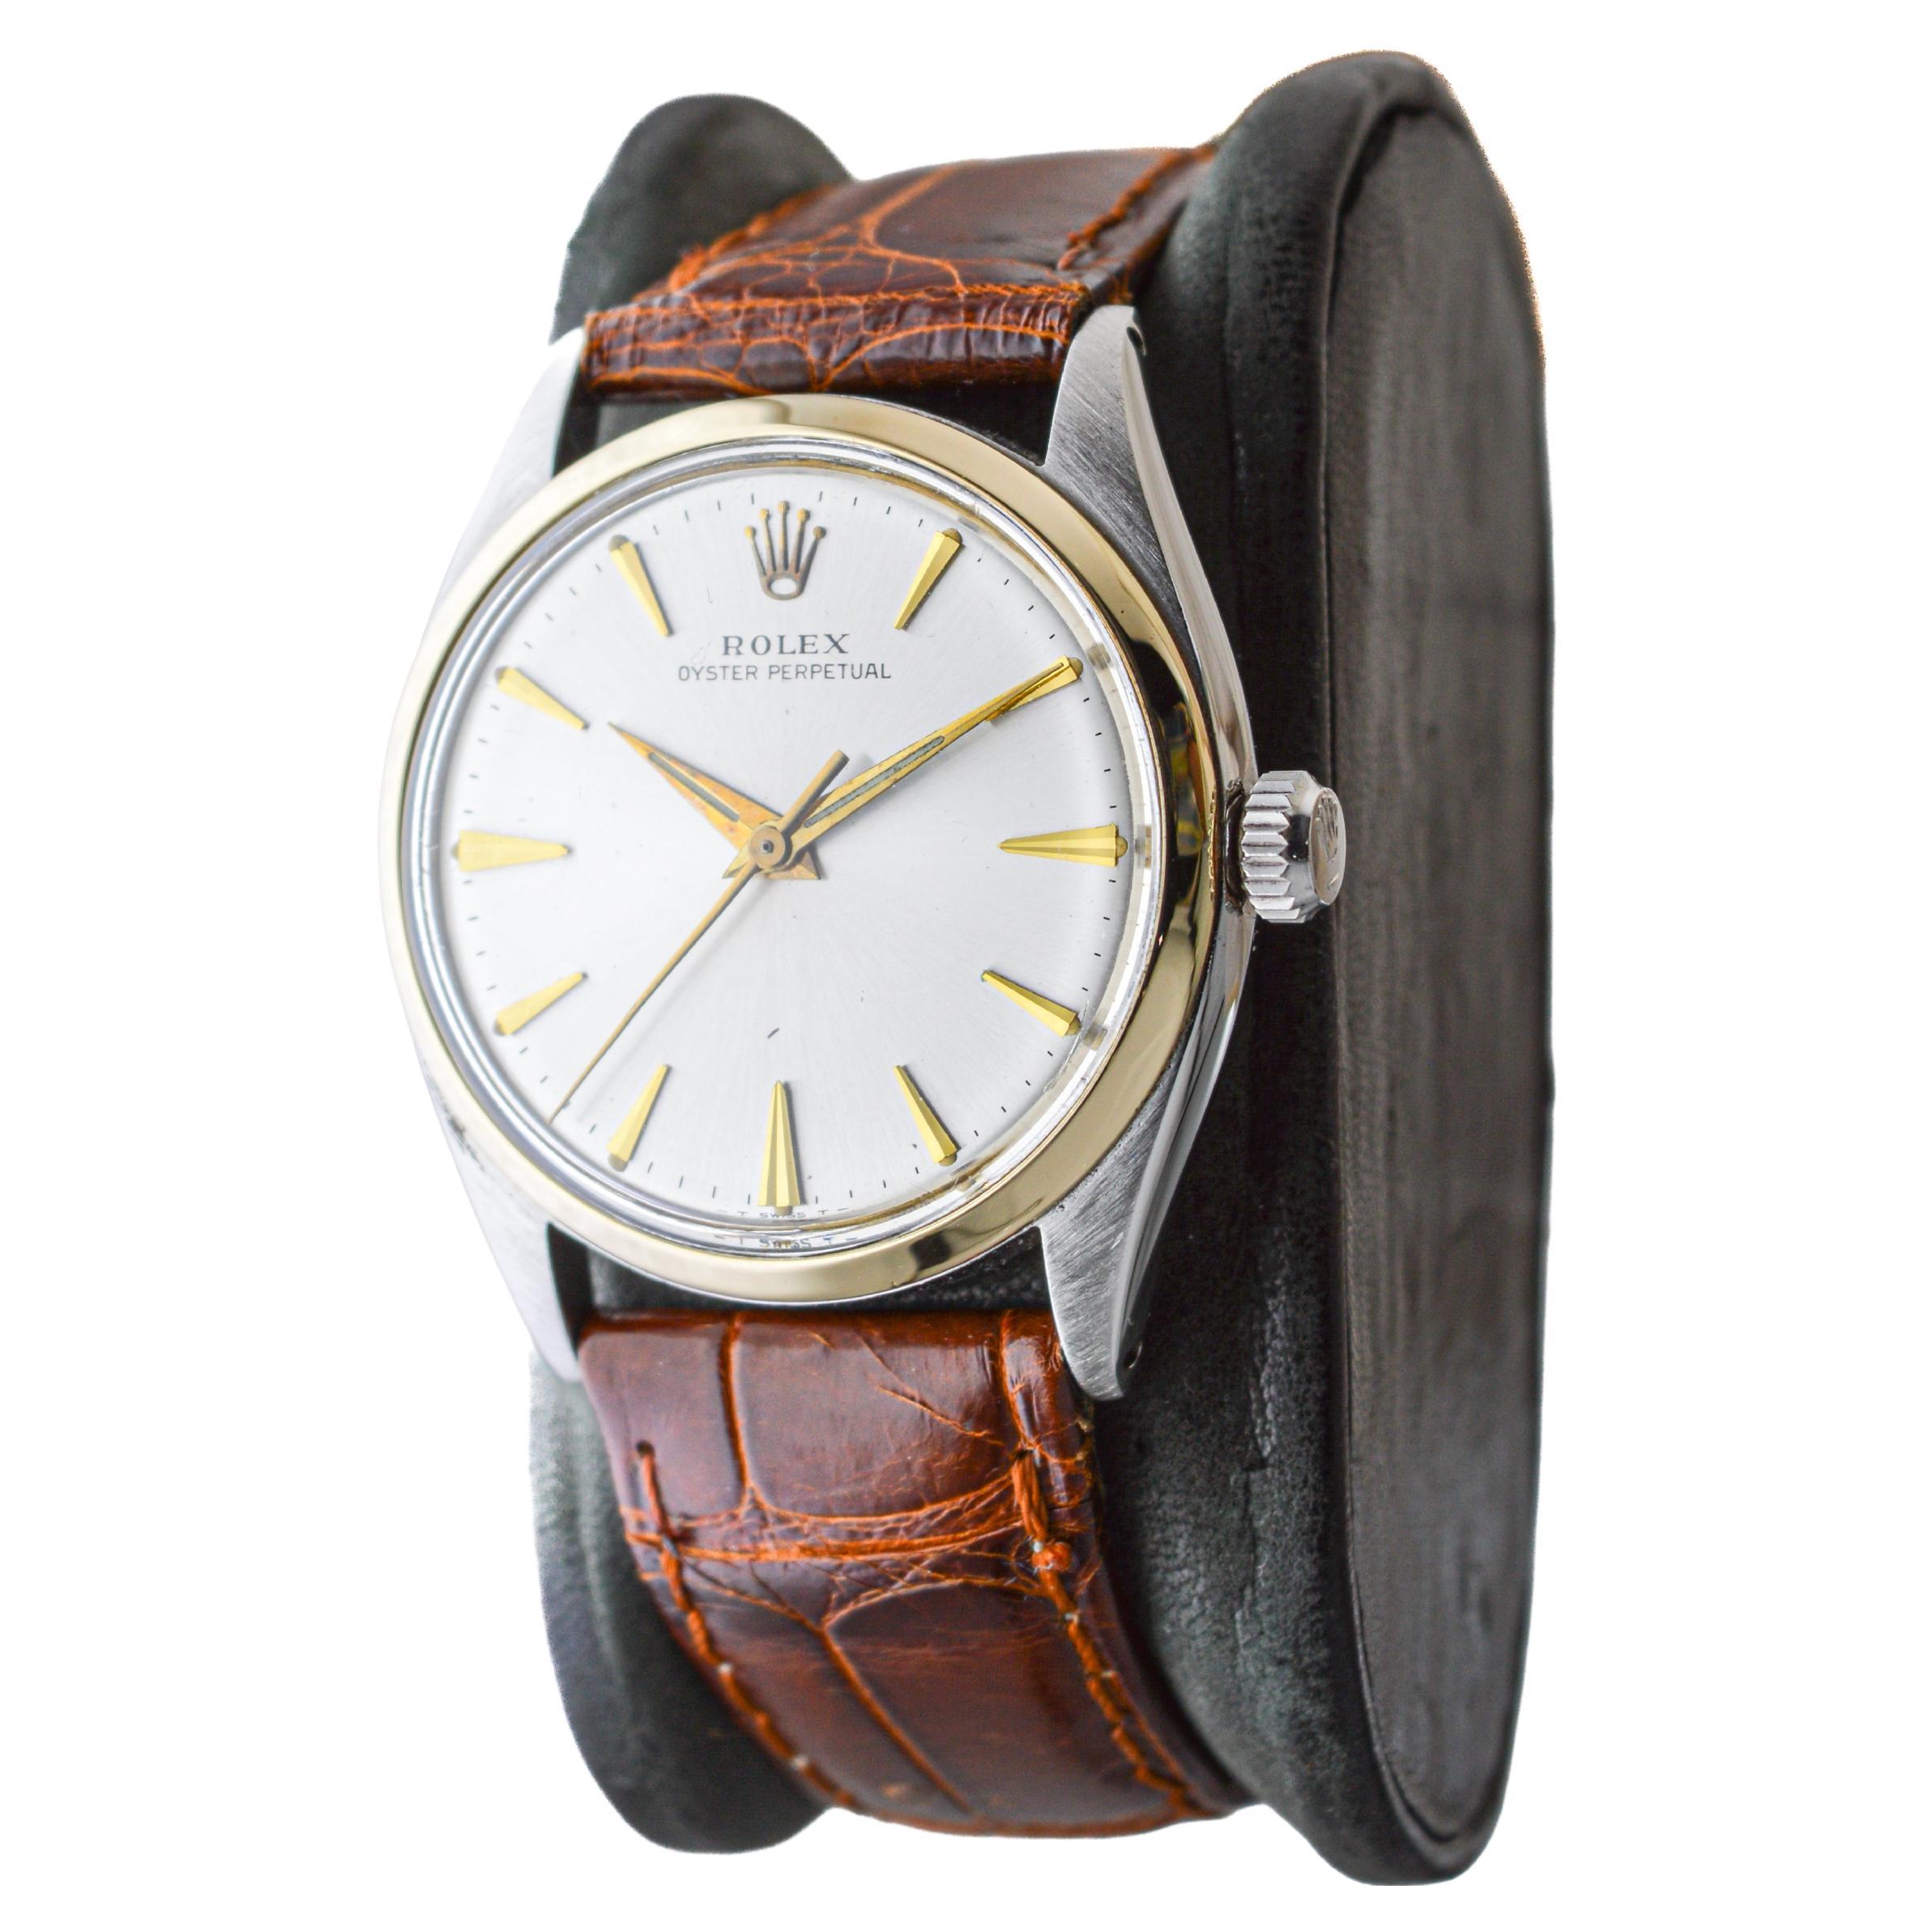 Rolex Steel and Gold Oyster Perpetual with Original Dial Rare Model circa, 1950s For Sale 1